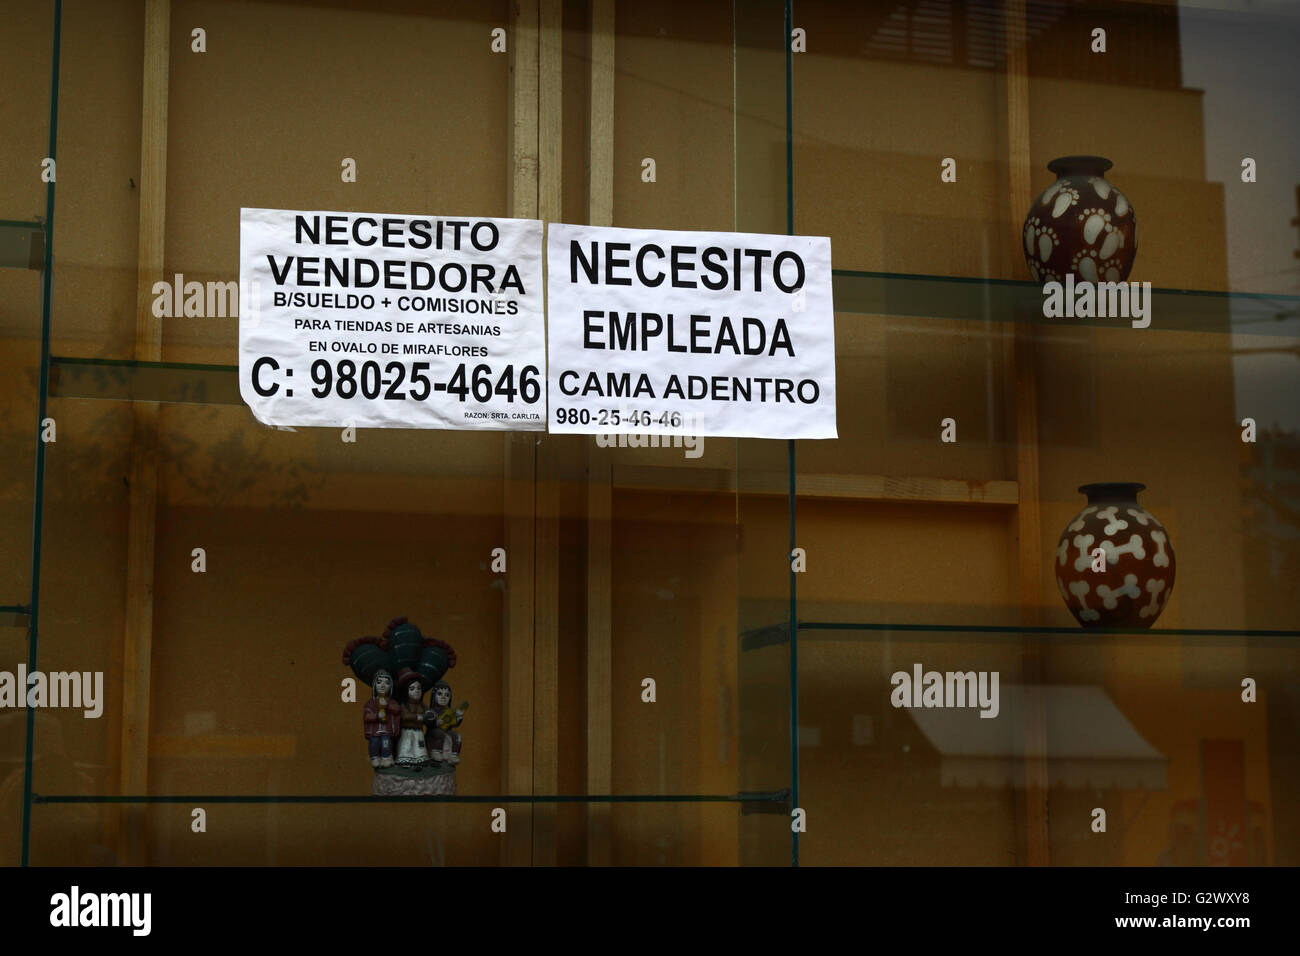 Notice advertising work for sales assistant and domestic help in Spanish on shop window, Miraflores, Lima, Peru Stock Photo